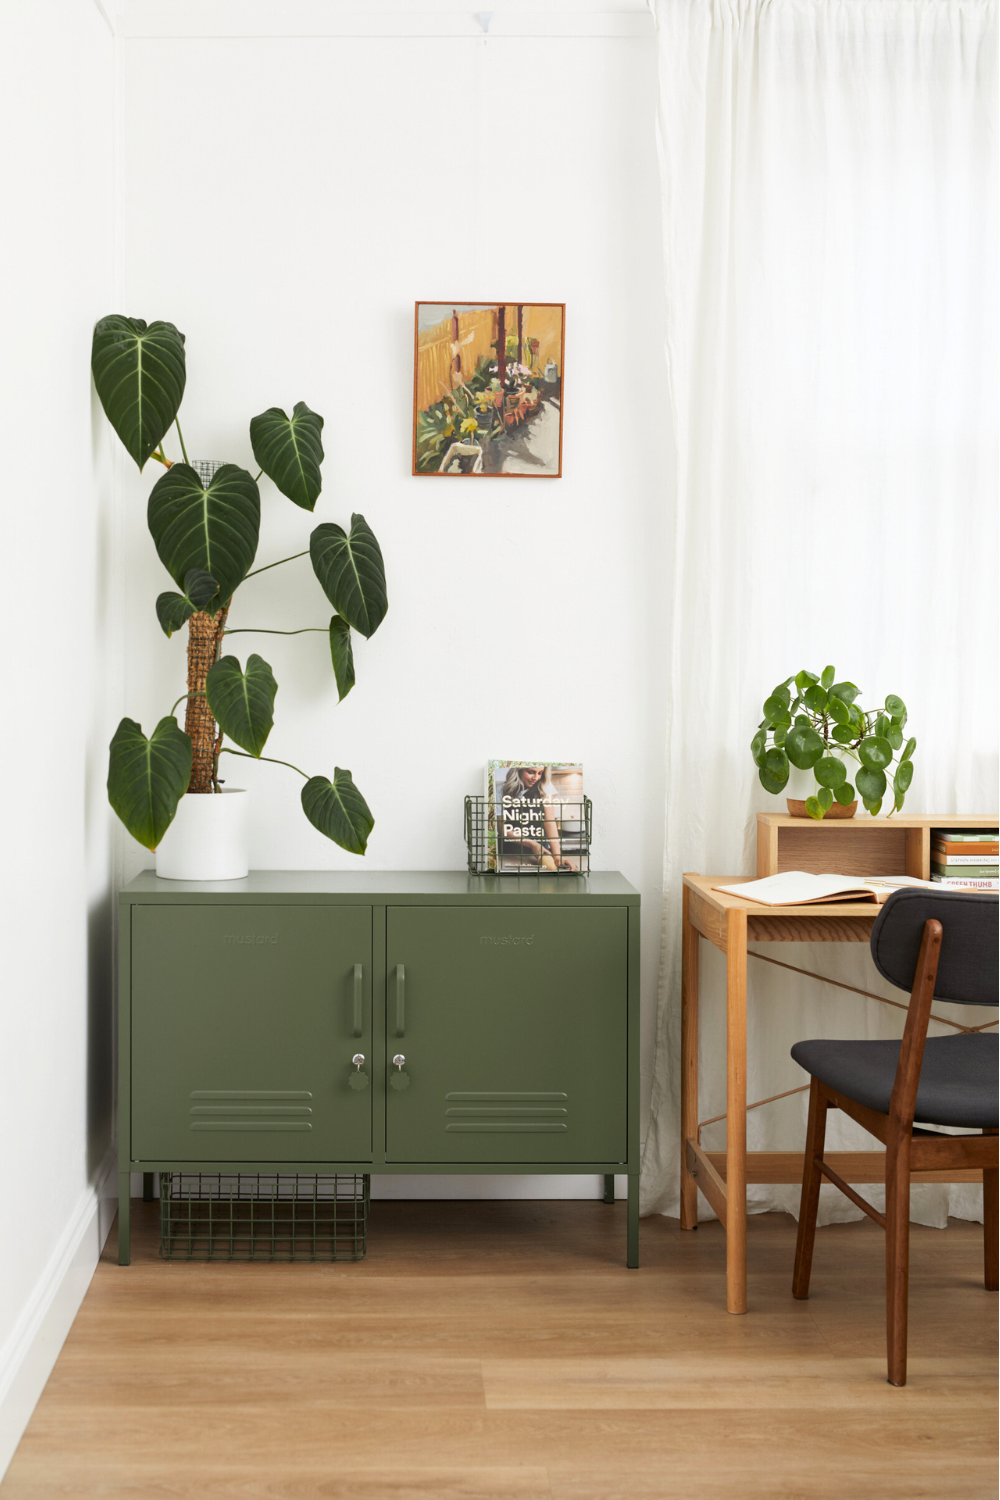 An Olive Lowdown is styled in a home office next to a small wooden desk. There is a tall potted plant on top of the locker and a small painting on the wall.